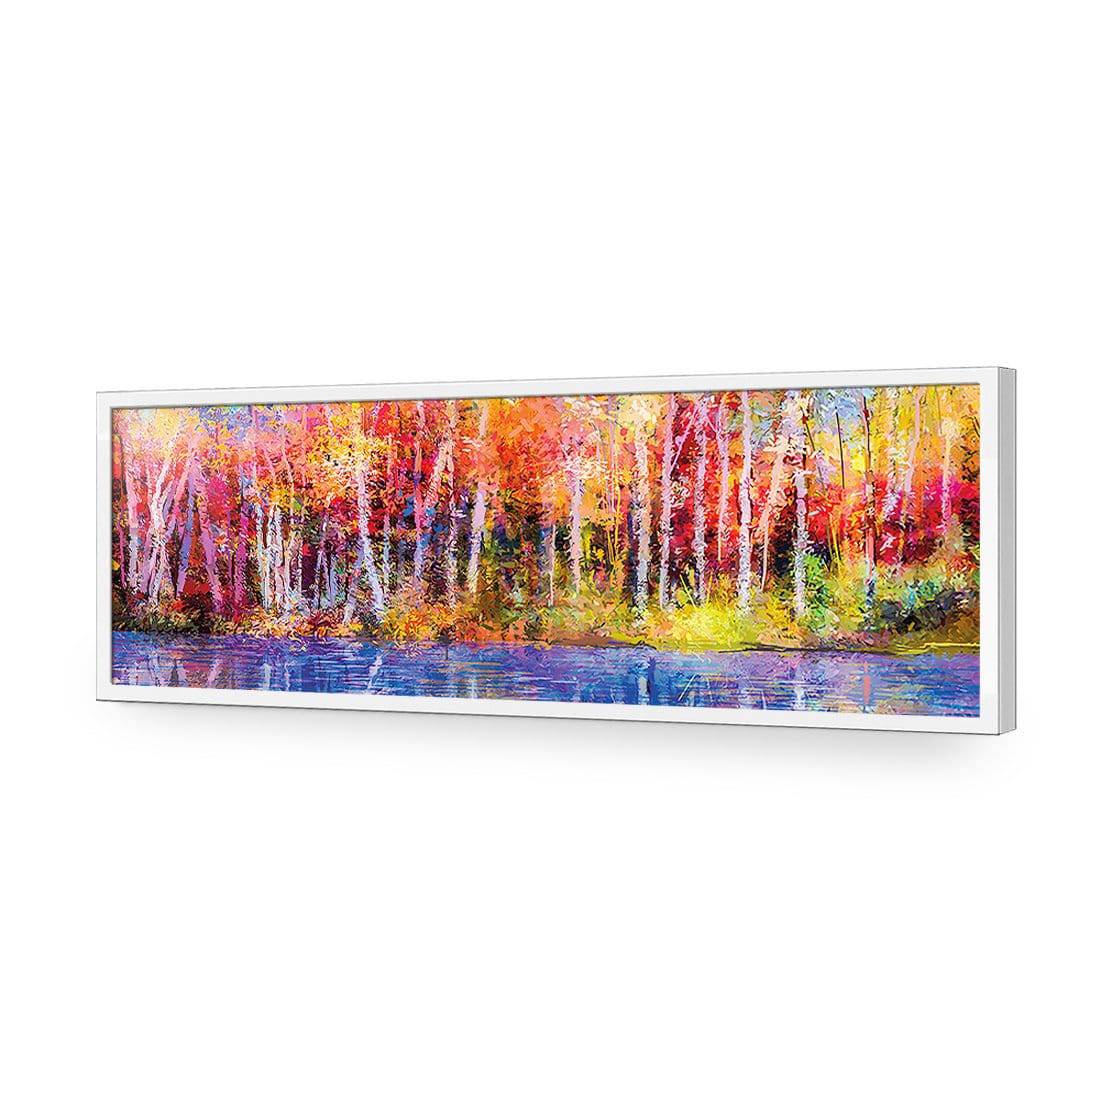 Rainbow Tree Forest, Long-Acrylic-Wall Art Design-Without Border-Acrylic - White Frame-60x20cm-Wall Art Designs